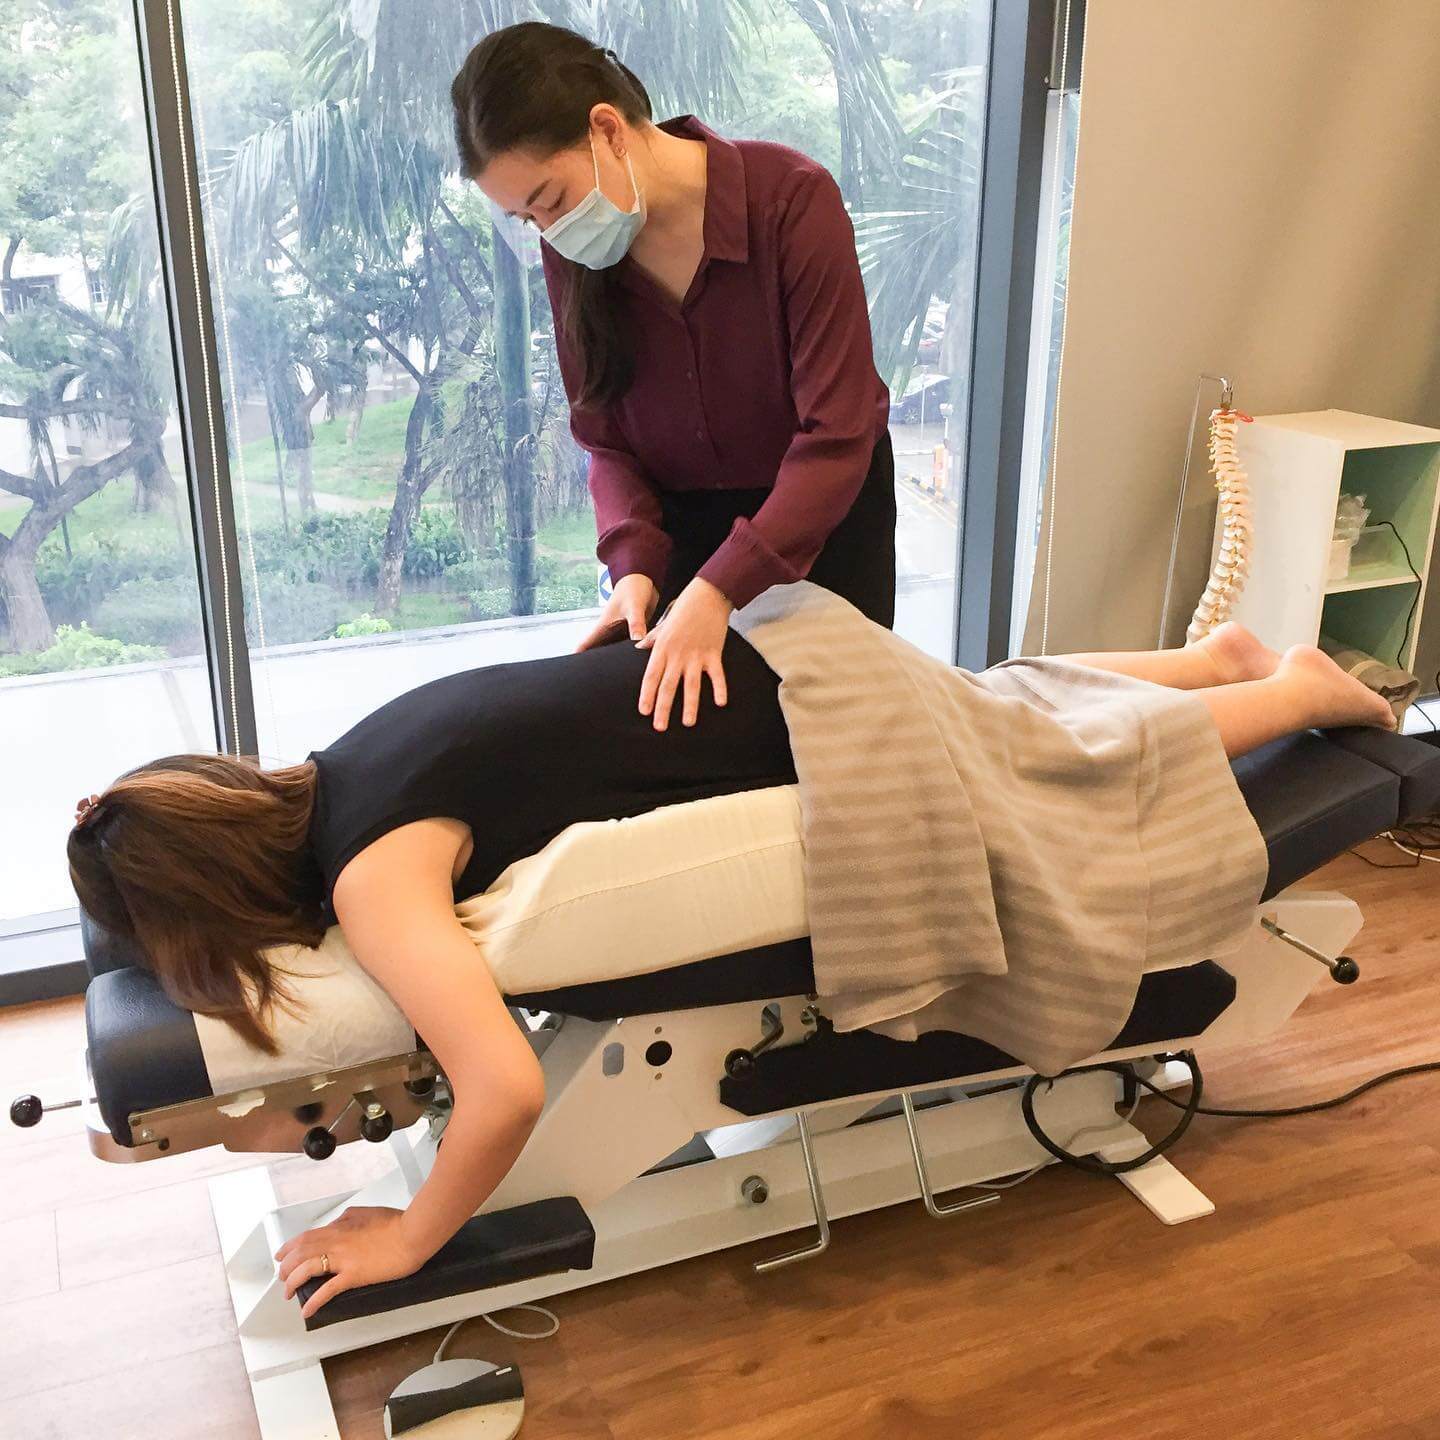 Chiropractic Care: Get to Know More About the Alternative Healthcare Treatment